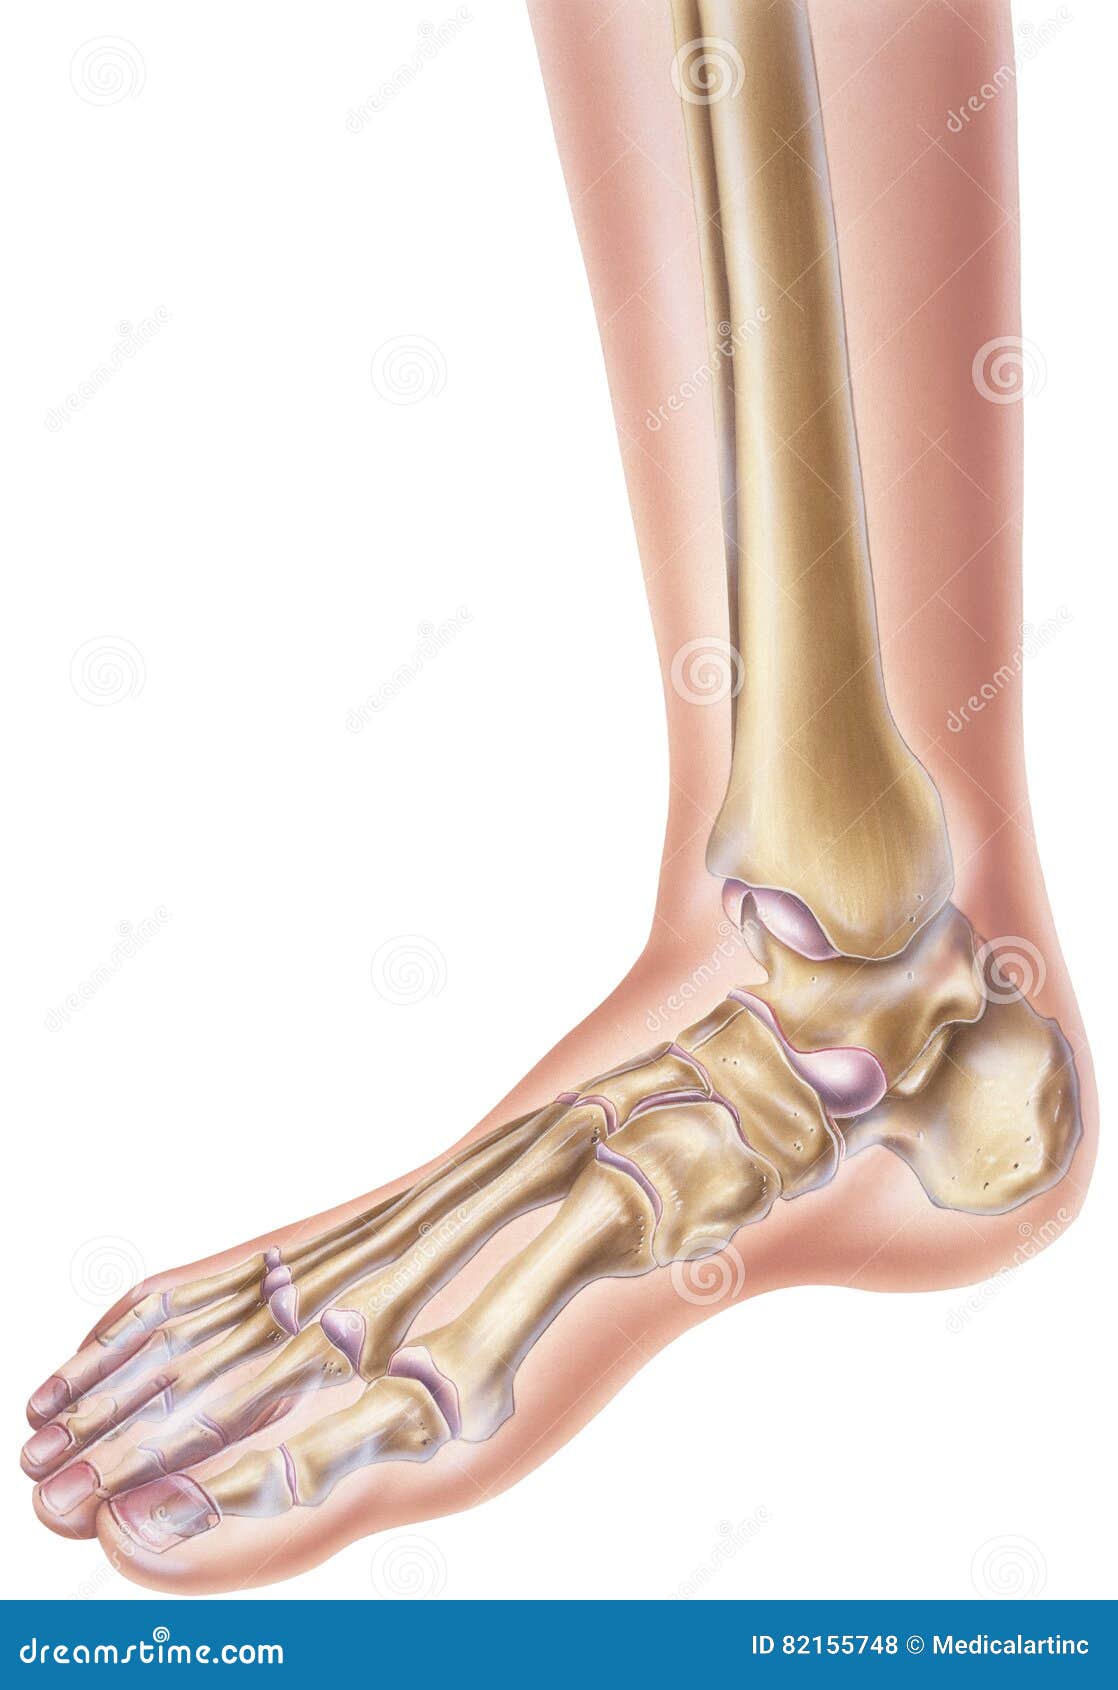 foot & ankle - showing bones and joints